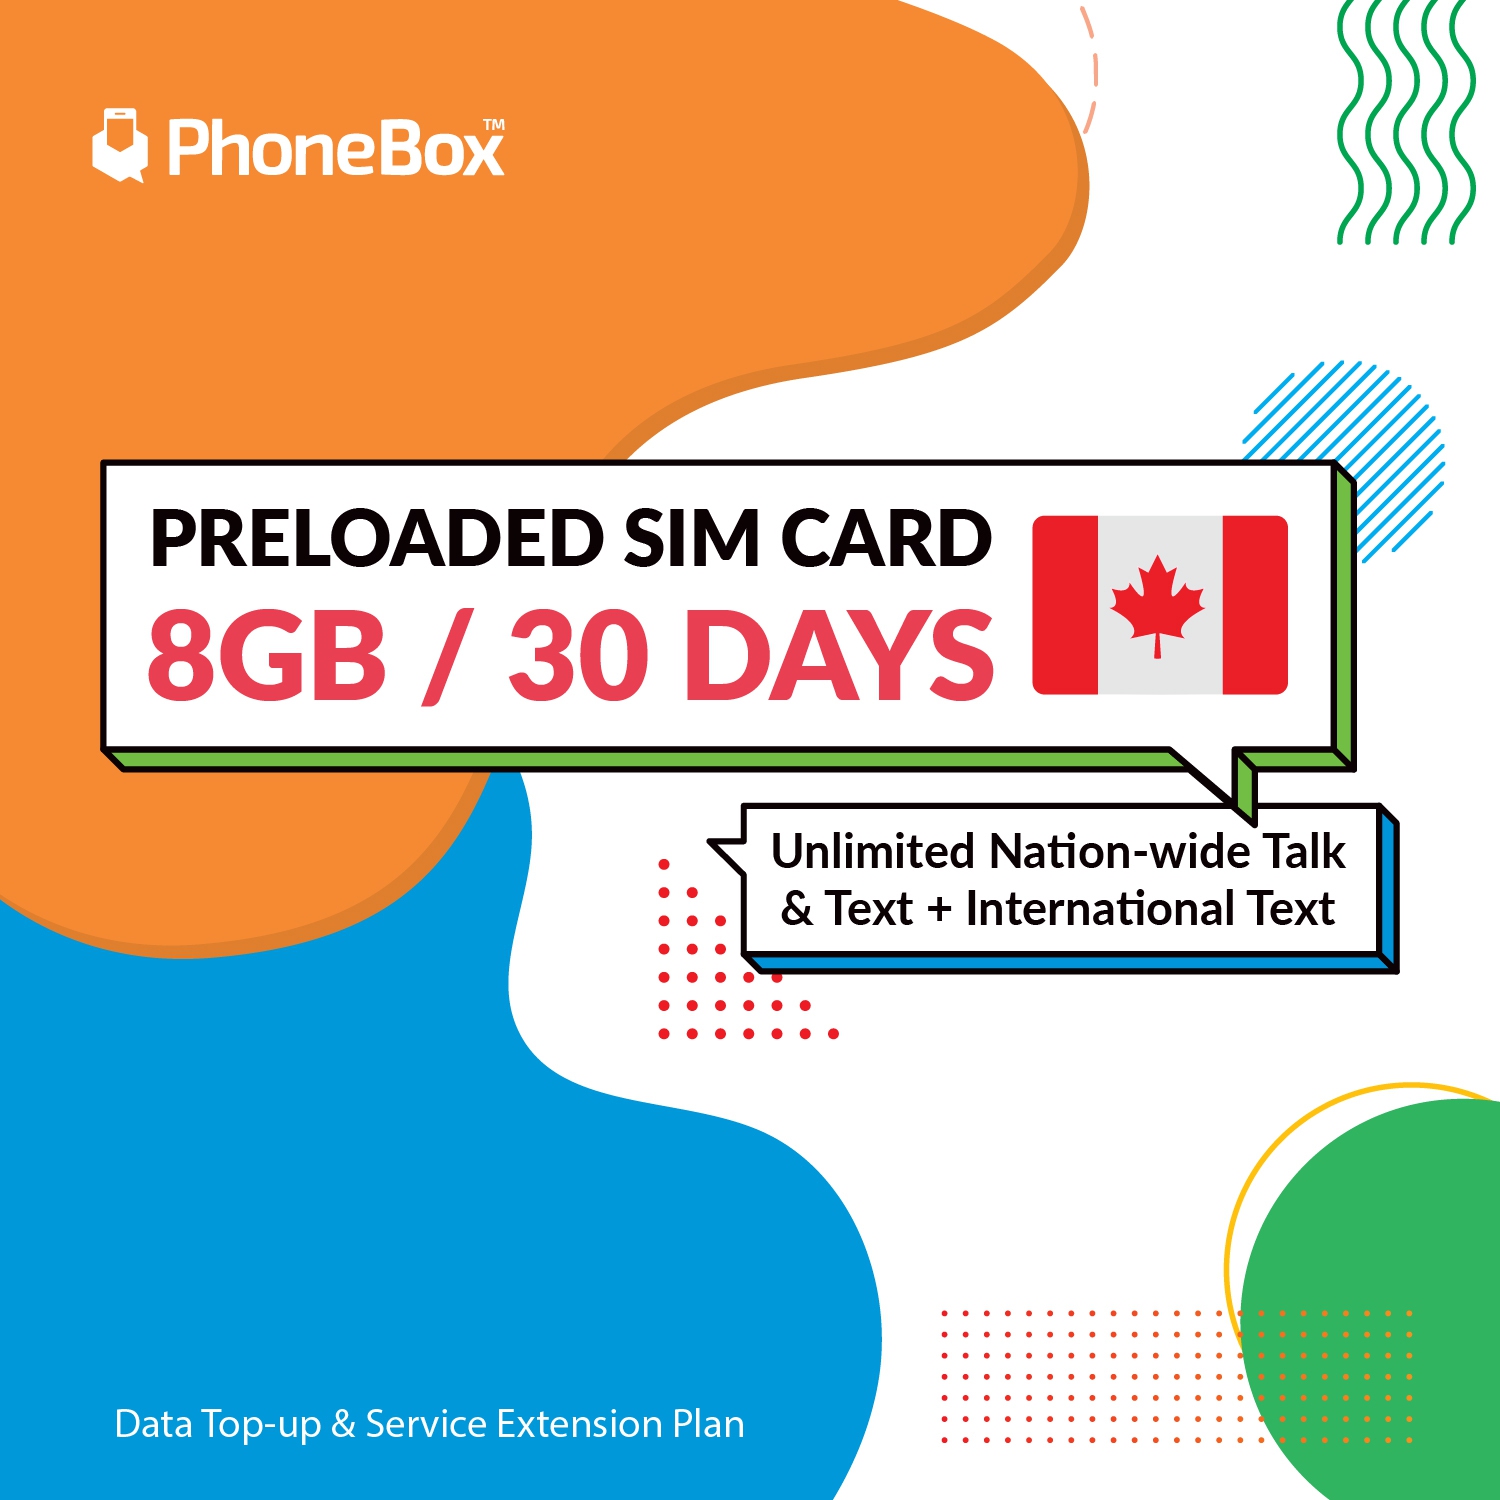 PhoneBox Preloaded 8GB Canadian SIM Card | 30 Days | No Contracts! 5G! Talk, Text, Data! No overage fees! Unlimited International Text!